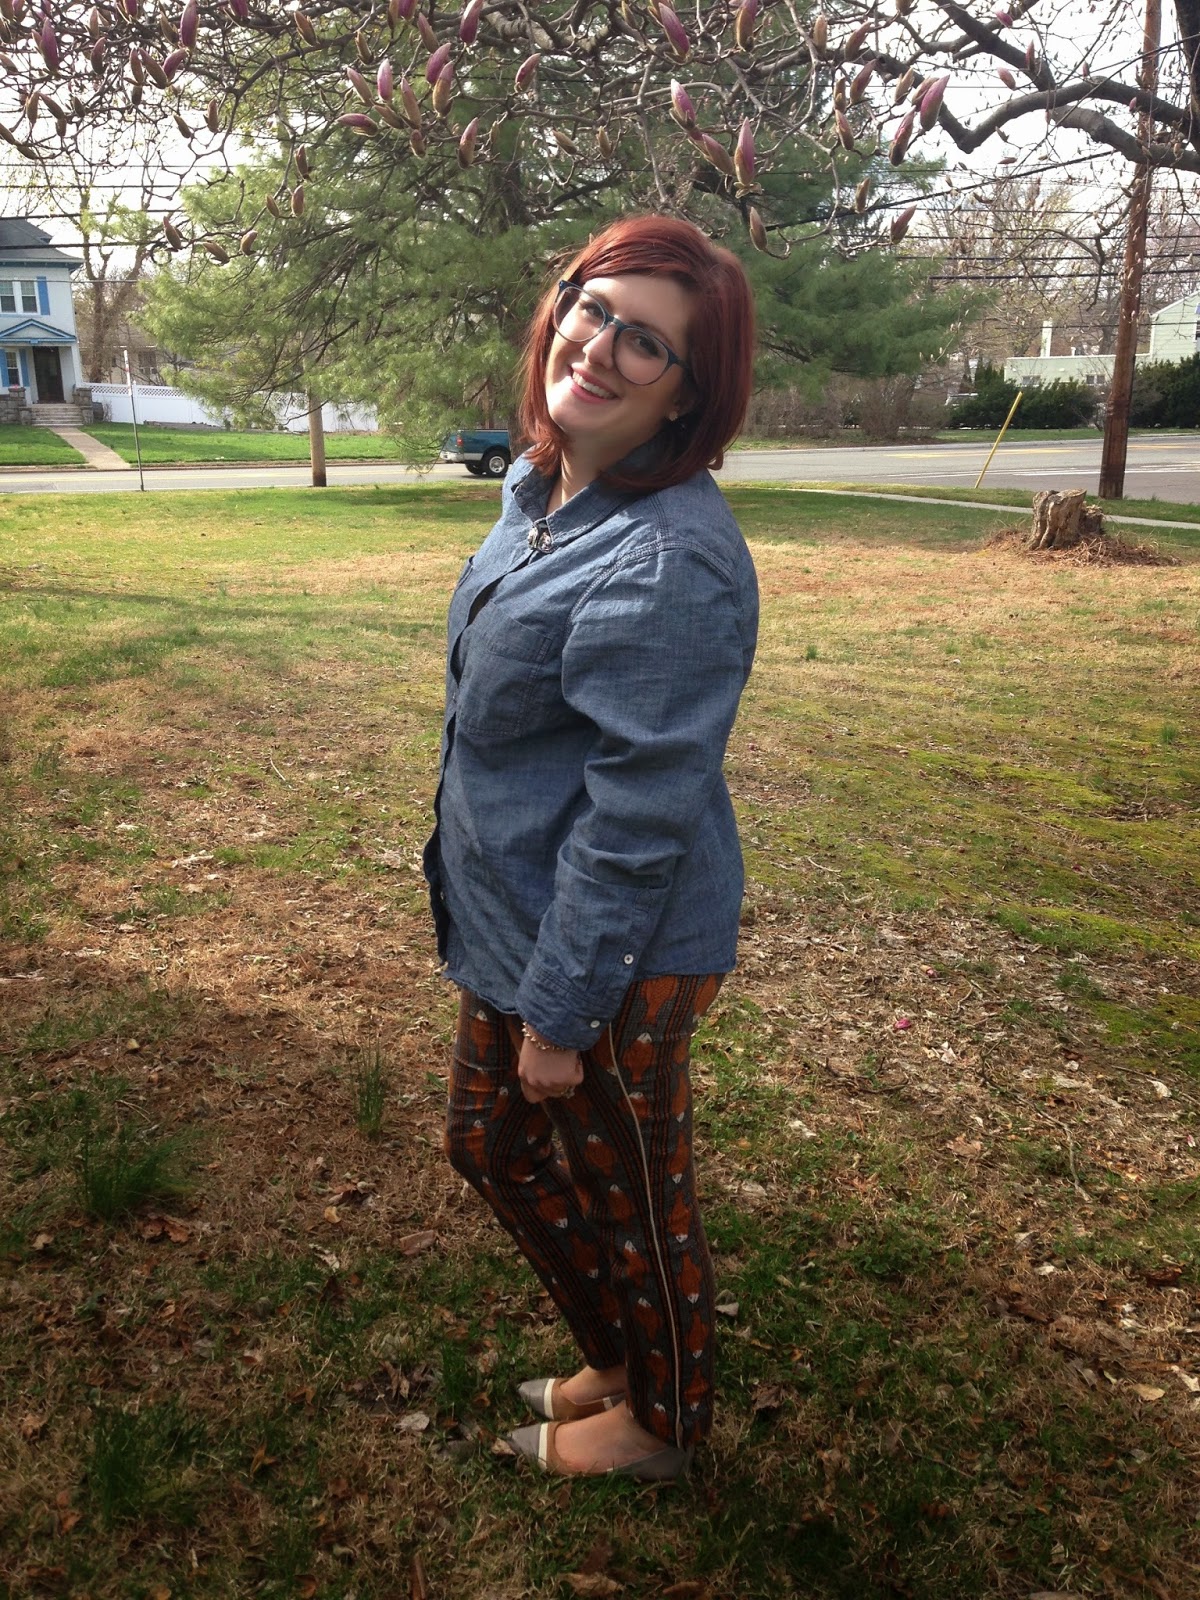 behind the leopard glasses: Shop Girl Saturday! Spring cleaning for my ...